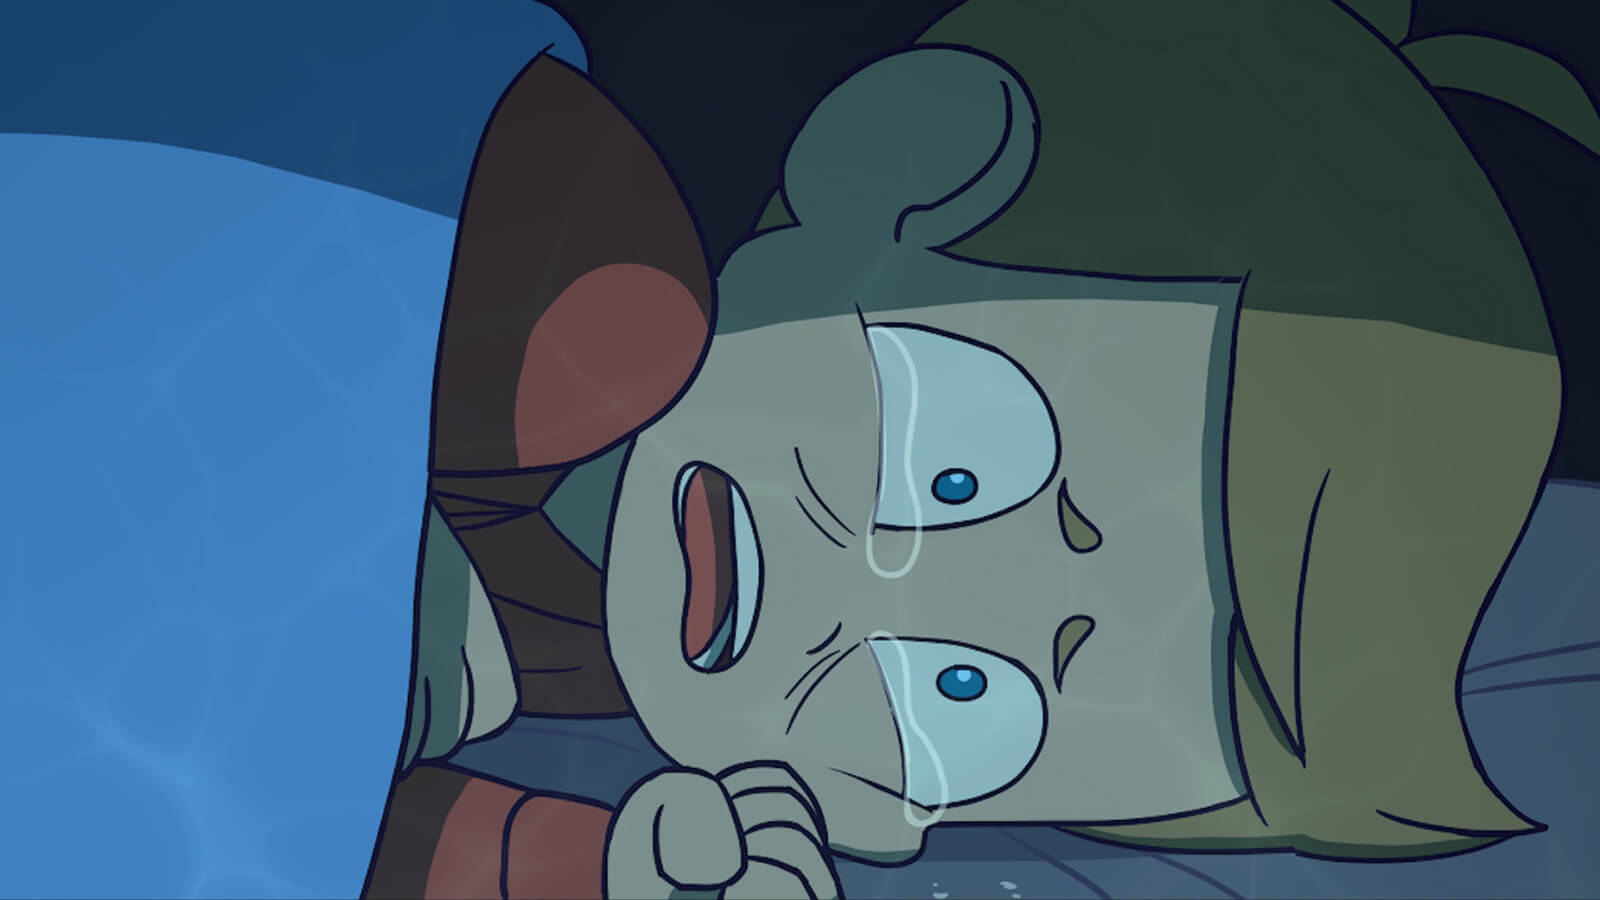 A boy crying on his side in bed.